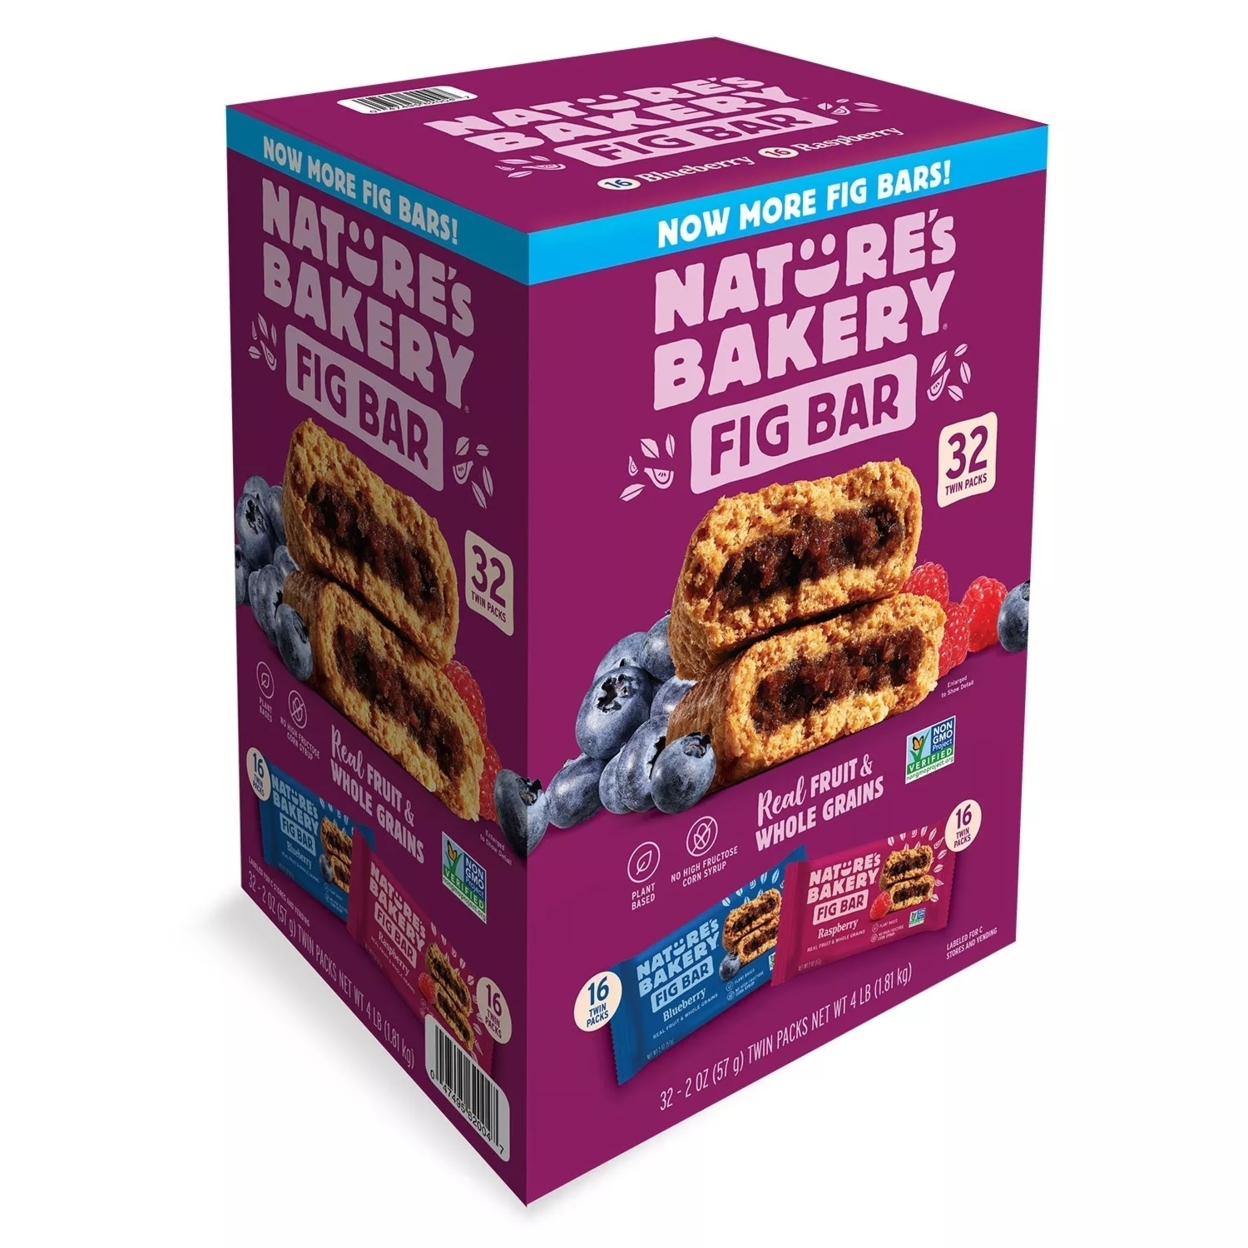 Nature's Bakery Fig Bars Variety Pack, Blueberry & Raspberry, 2 Ounce (32 Count)